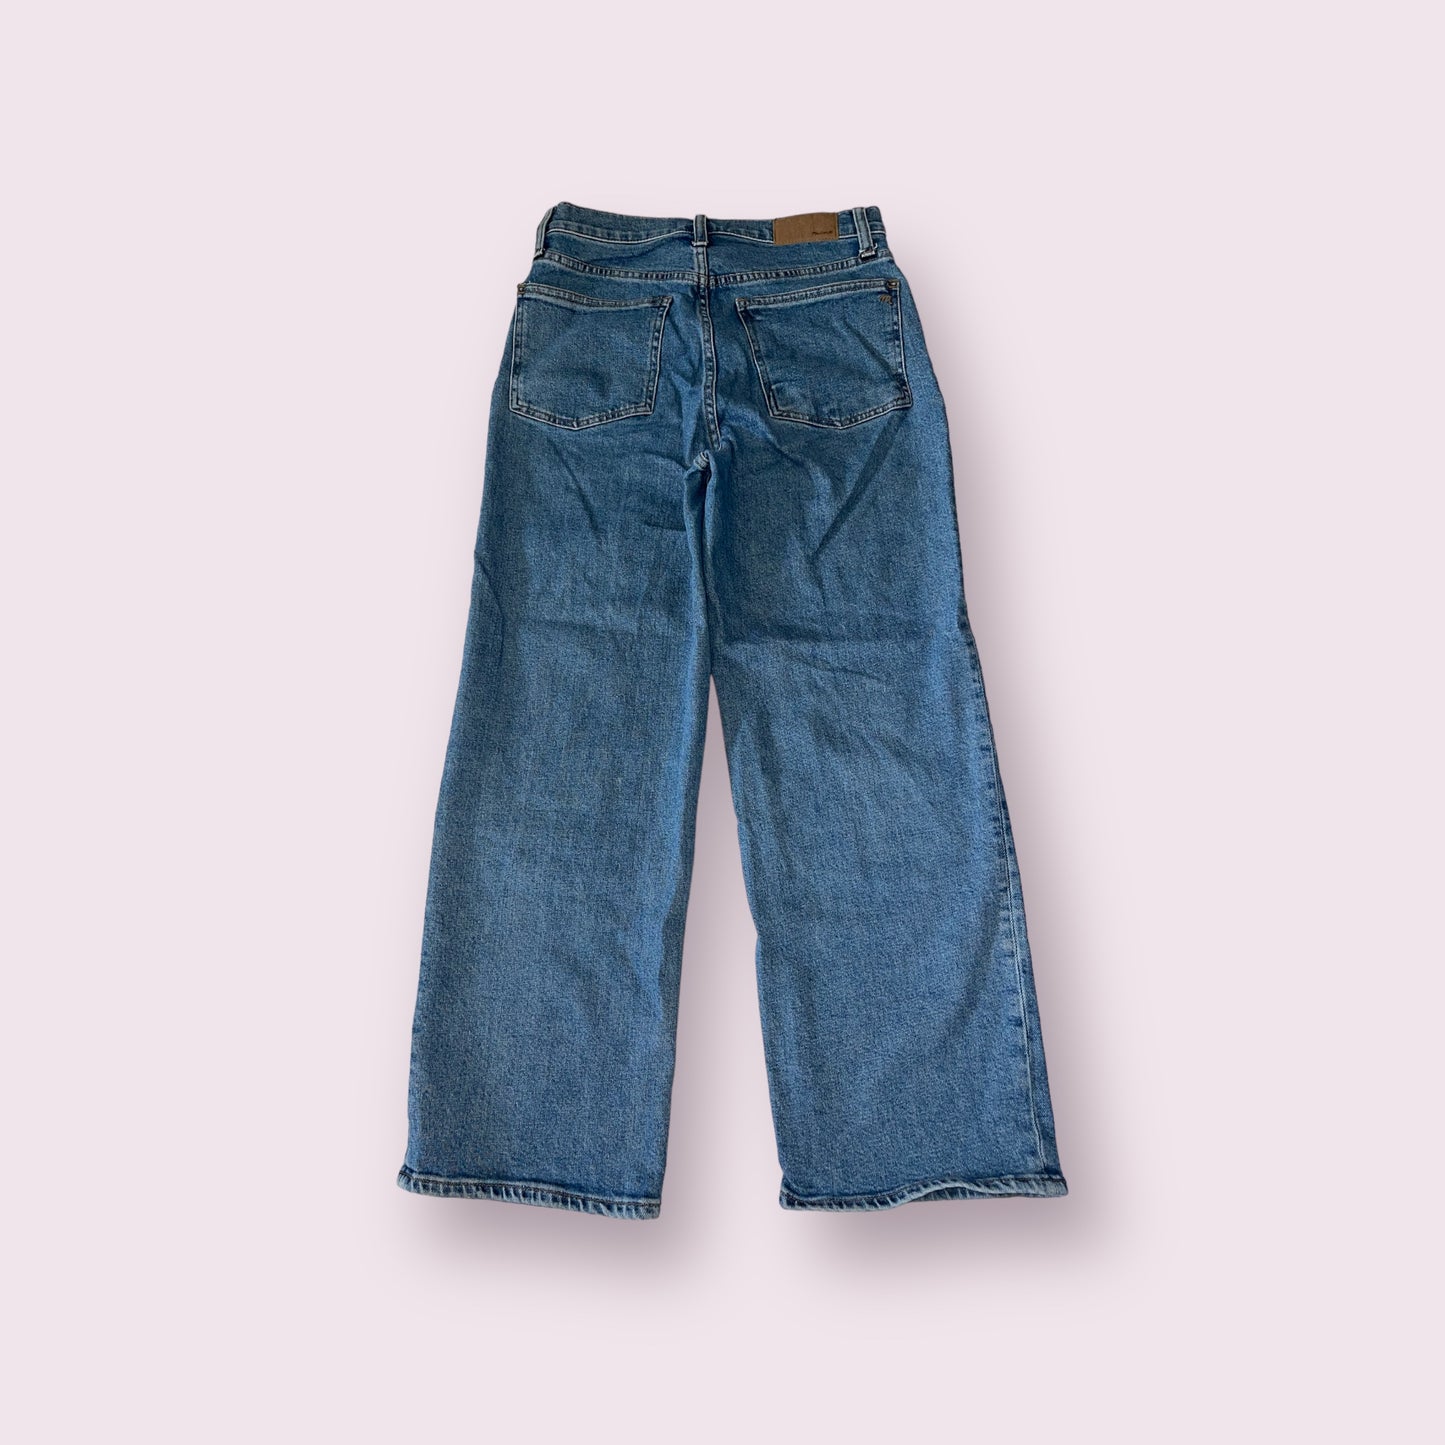 Madewell jeans - Size 26